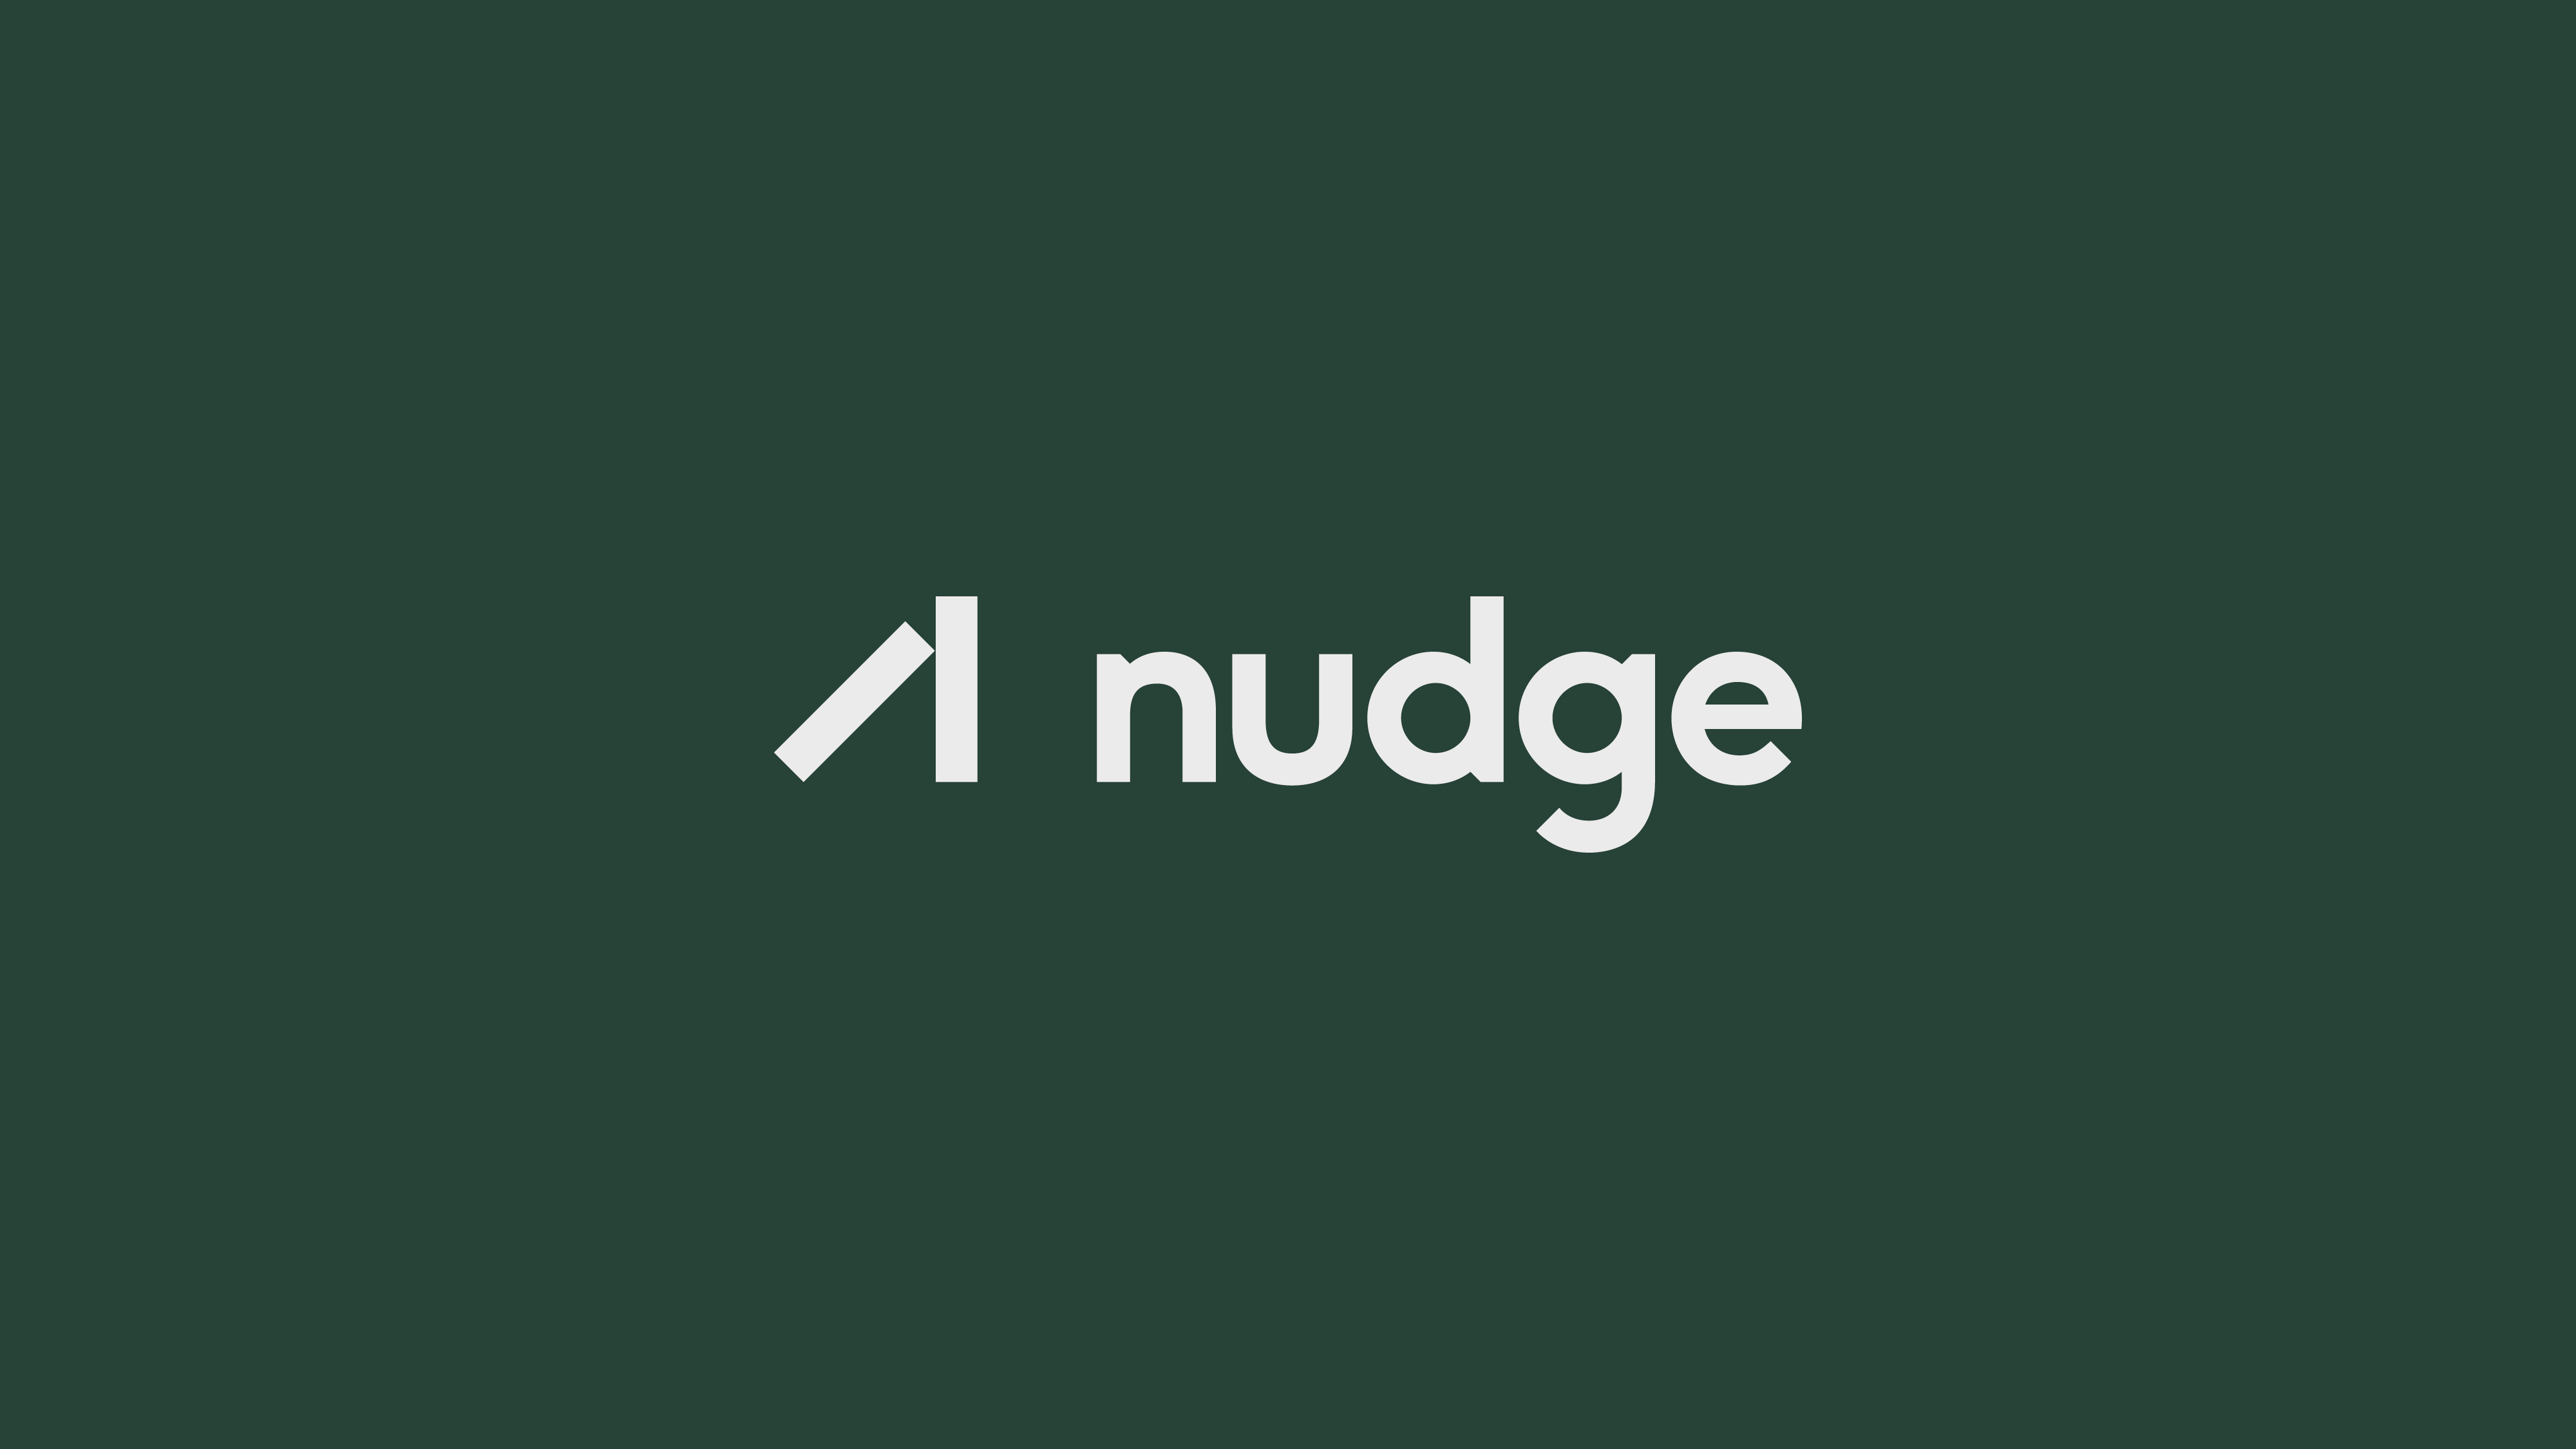 Dark green background with the word nudge in a very light grey colour.